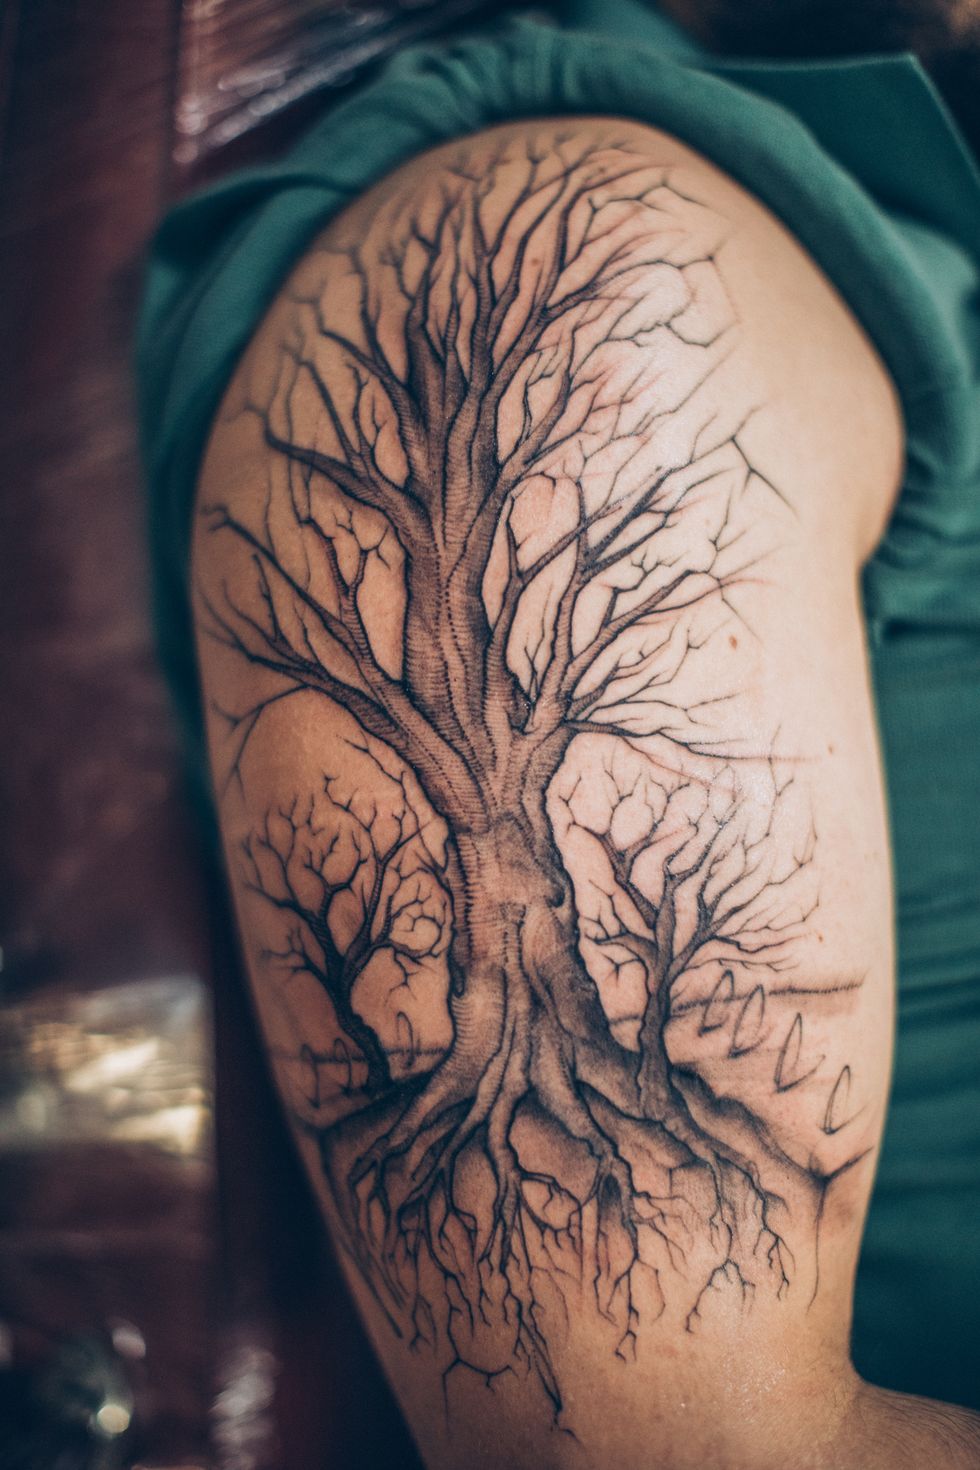 one man, tree tattoo on his arm is finished, part of